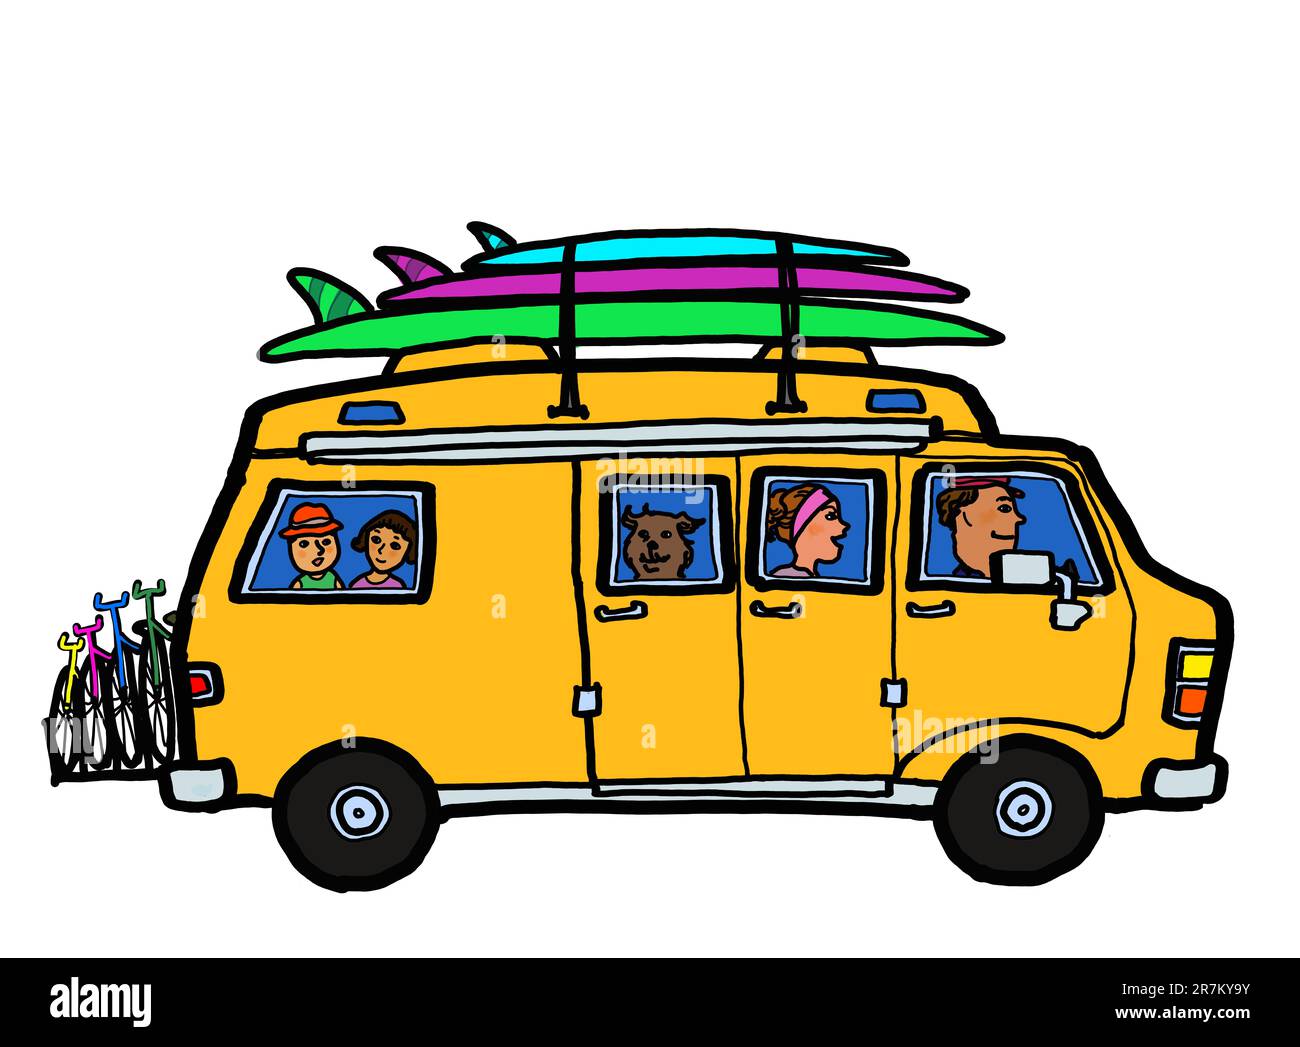 A group of family in a camper van vehicle with surfboard and bicycles travel camping outdoor road trip on vacation holiday freedom lifestyle. Stock Photo